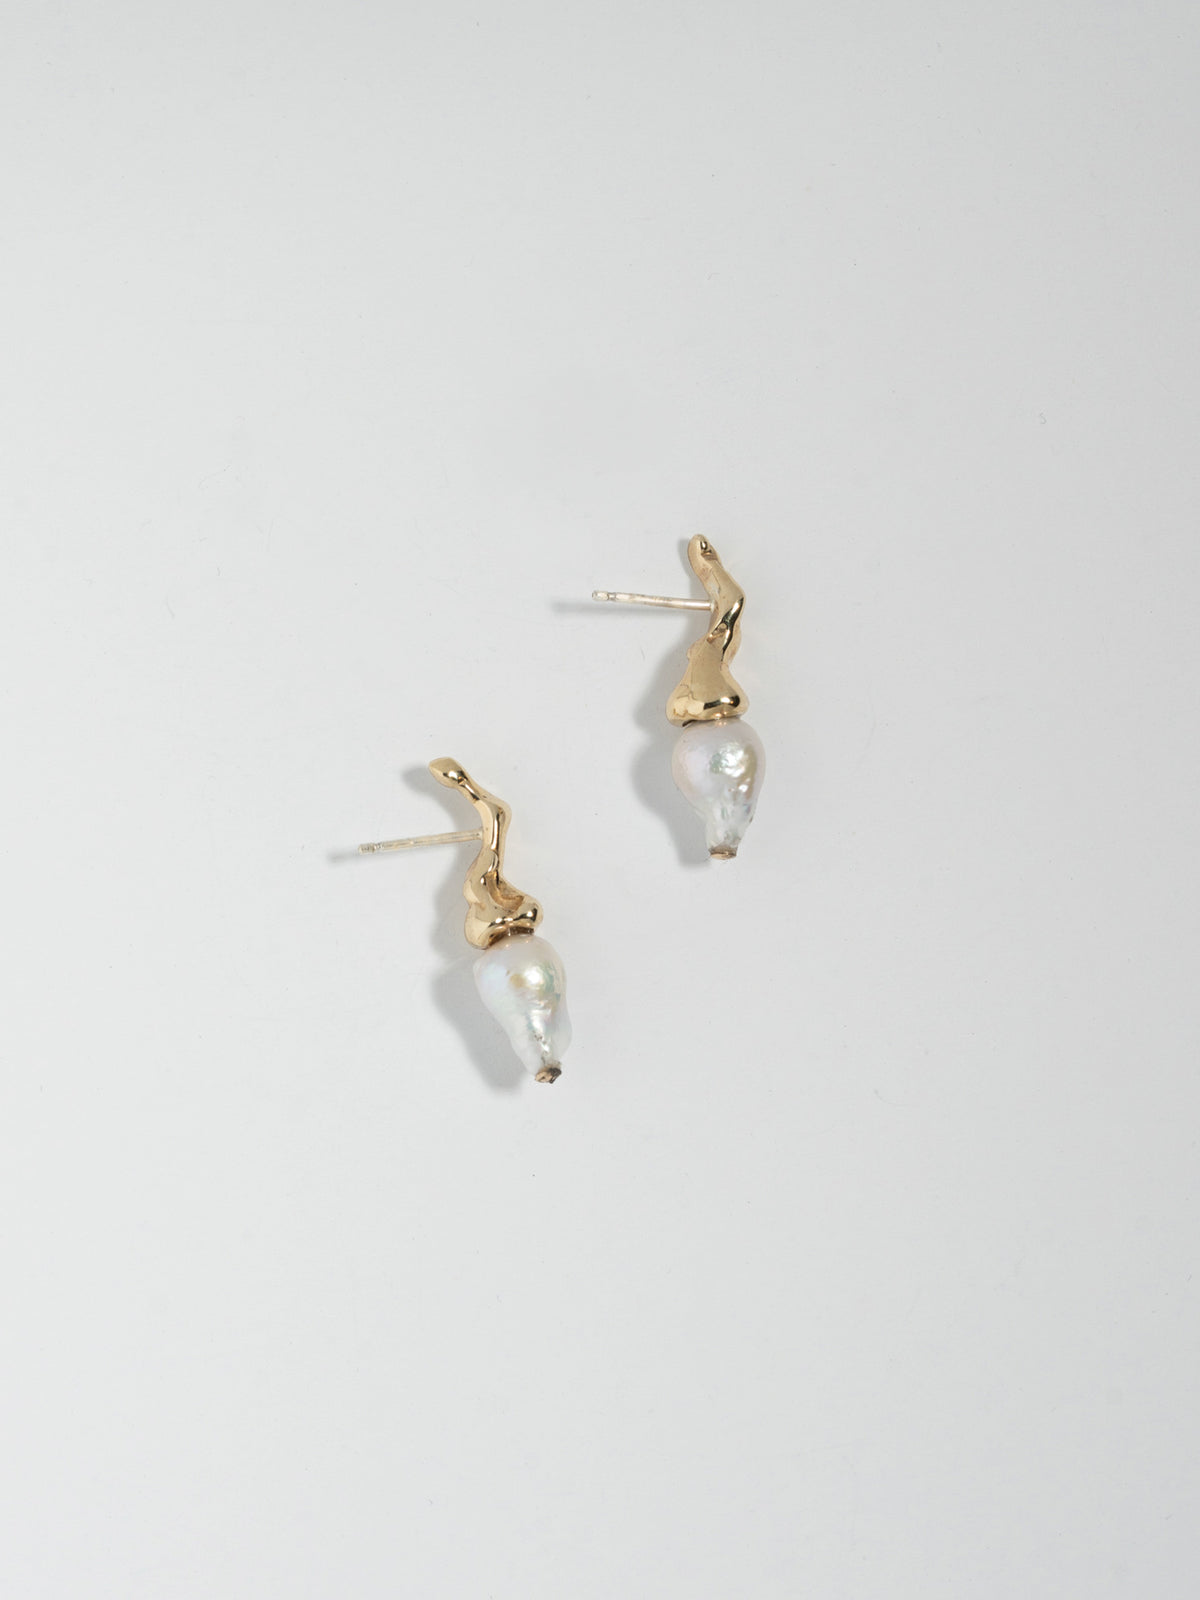 Product image of FARIS SPRIG PERLA in 14k gold. The pair of earrings are laid on its side, showing the post and earrings asymmetrical profile